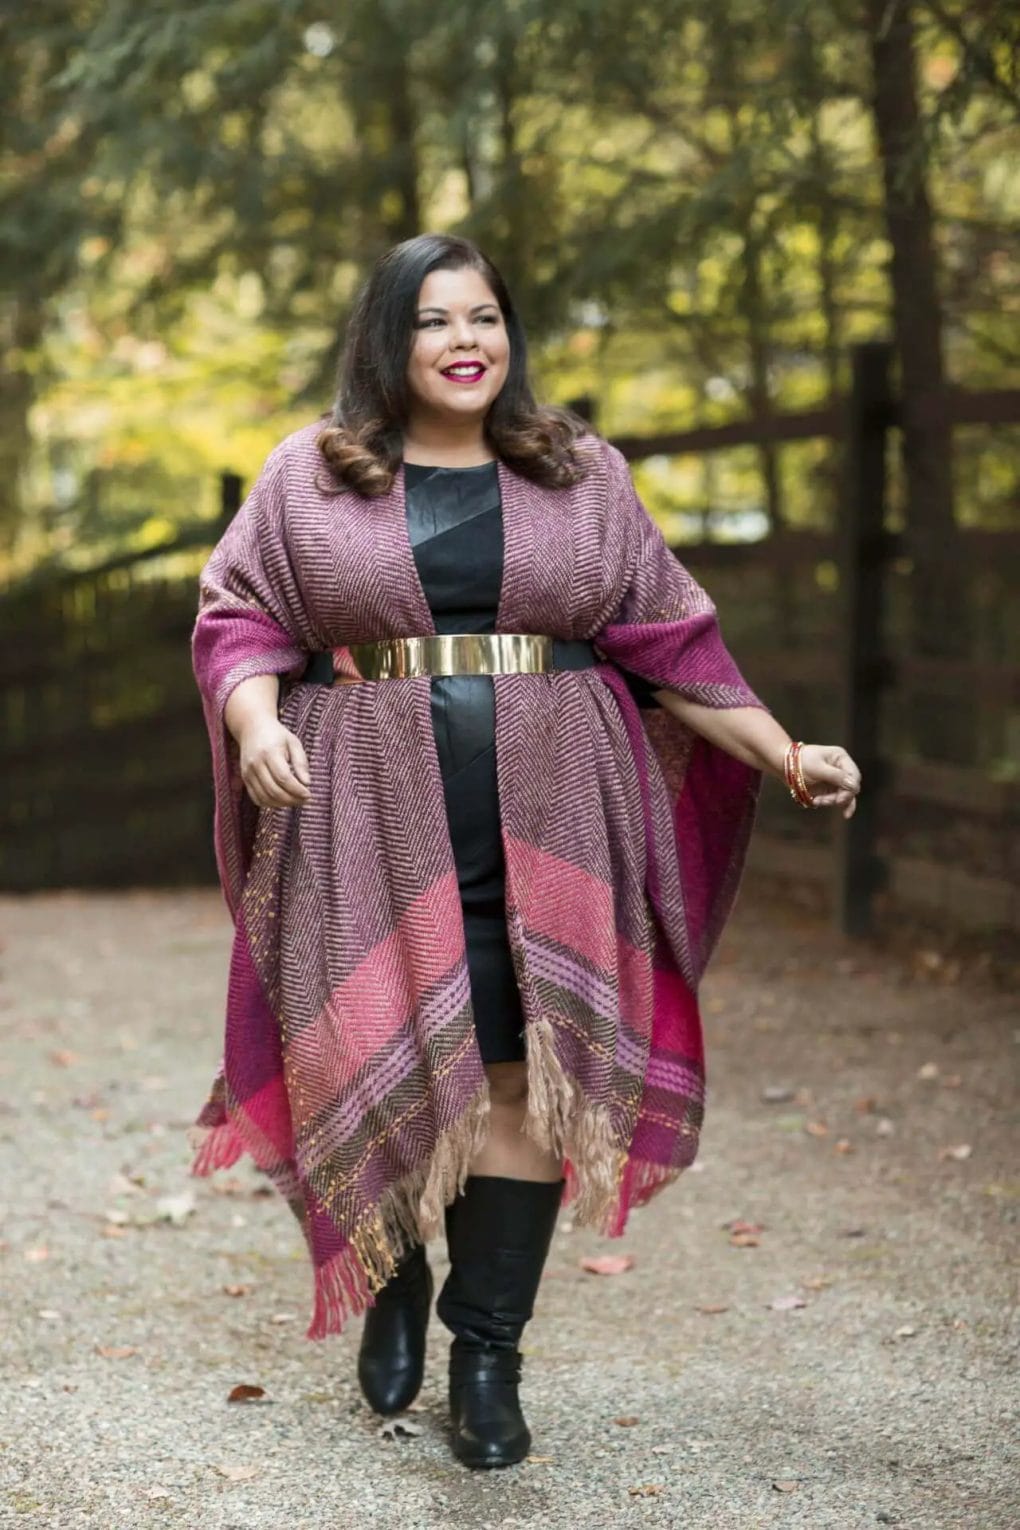 If you look in the right places, you will end up with great plus size complete outfits for everyday wear. We gathered some of the best plus size complete outfits one can find.